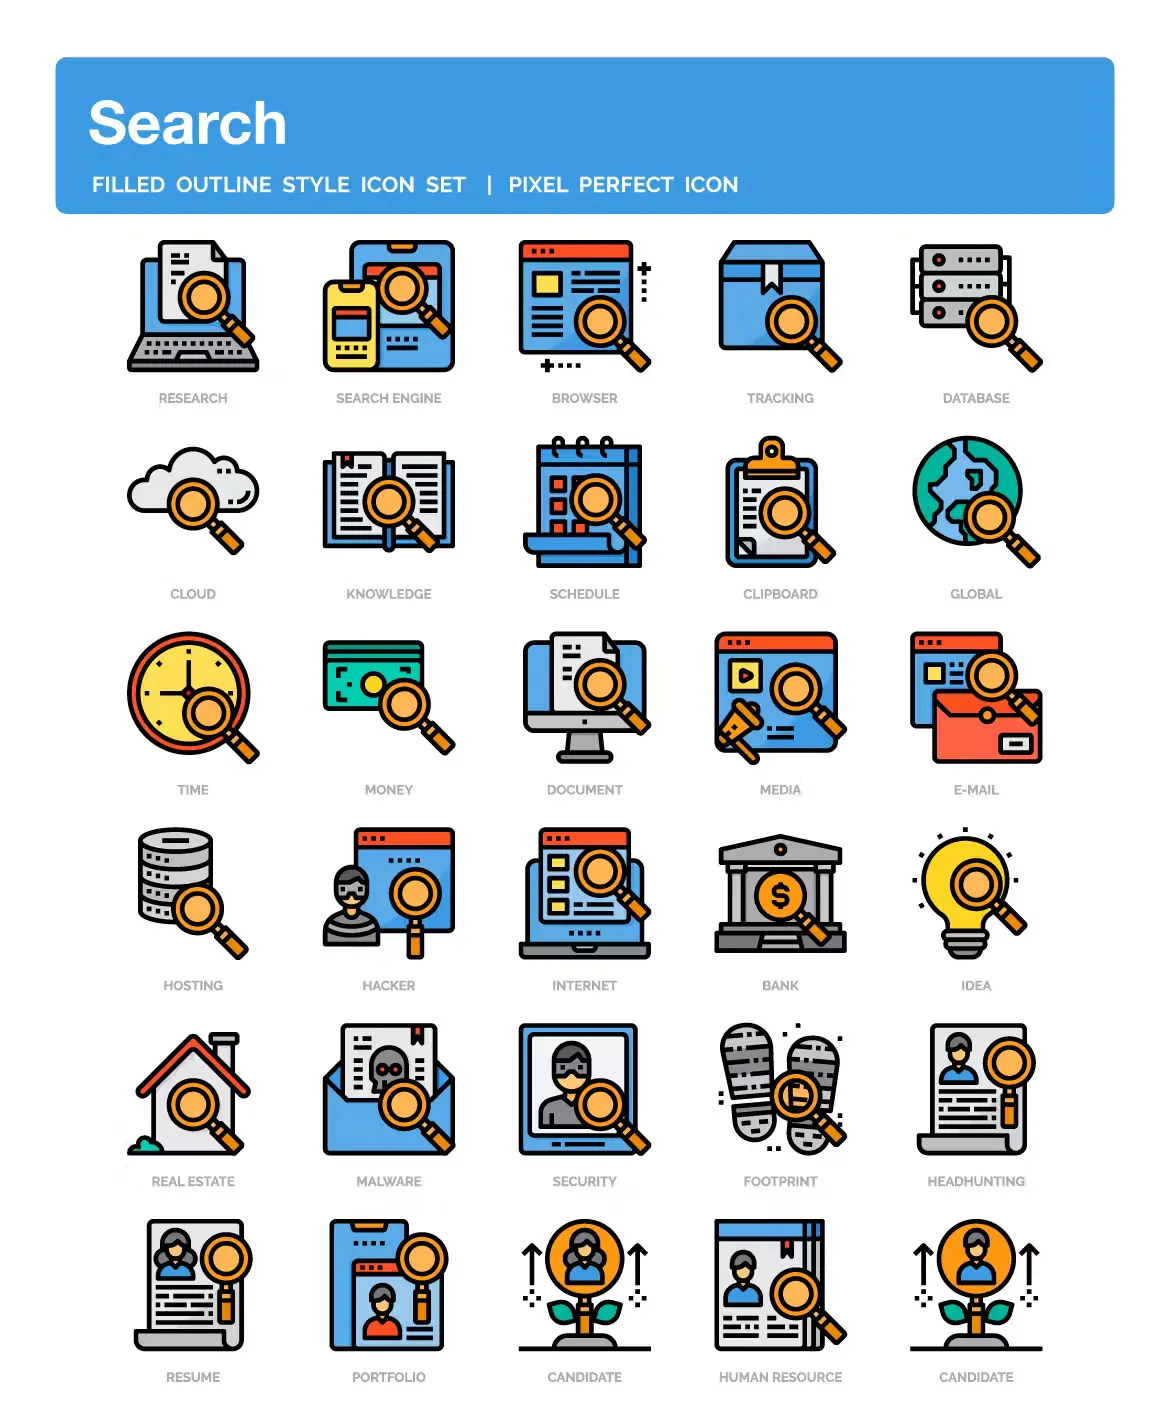 30 Search Icons Pack2